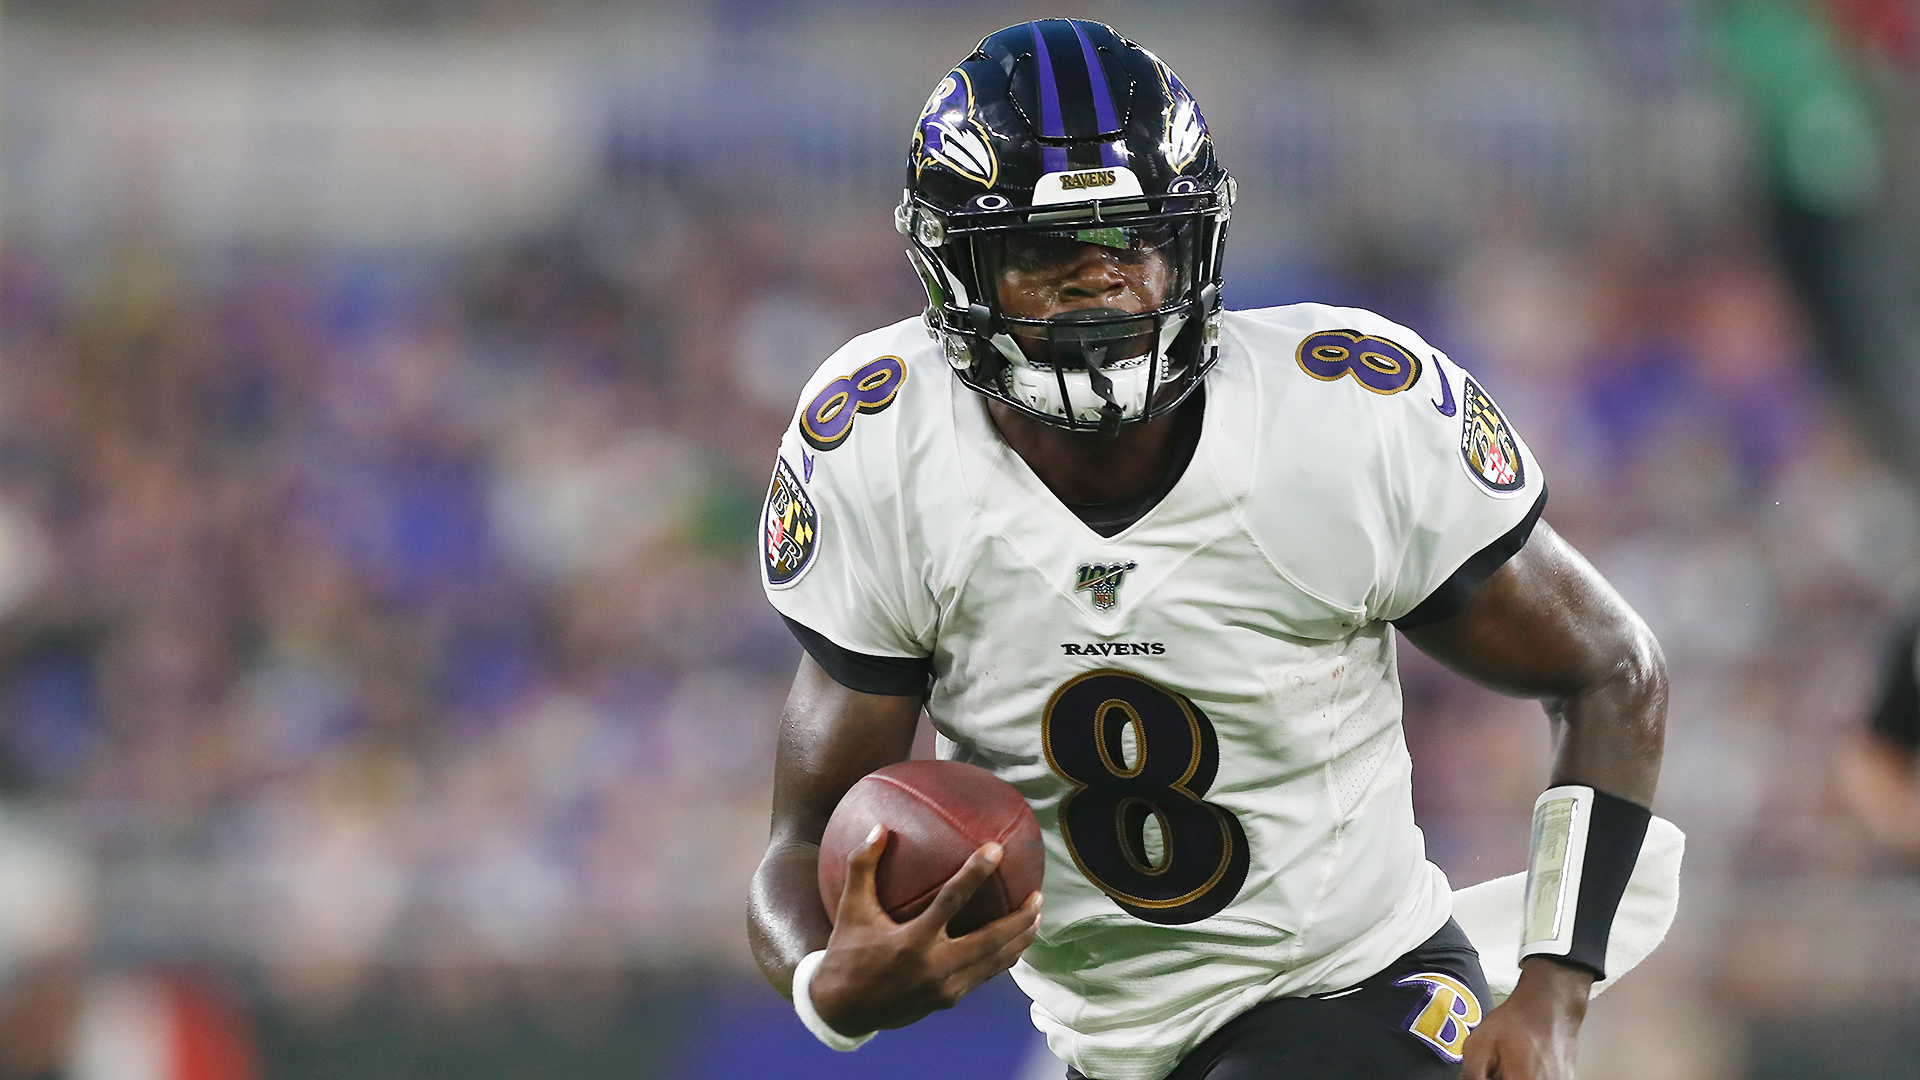 How exactly do the Ravens plan to use Lamar Jackson in 2019? | Sporting News1920 x 1080